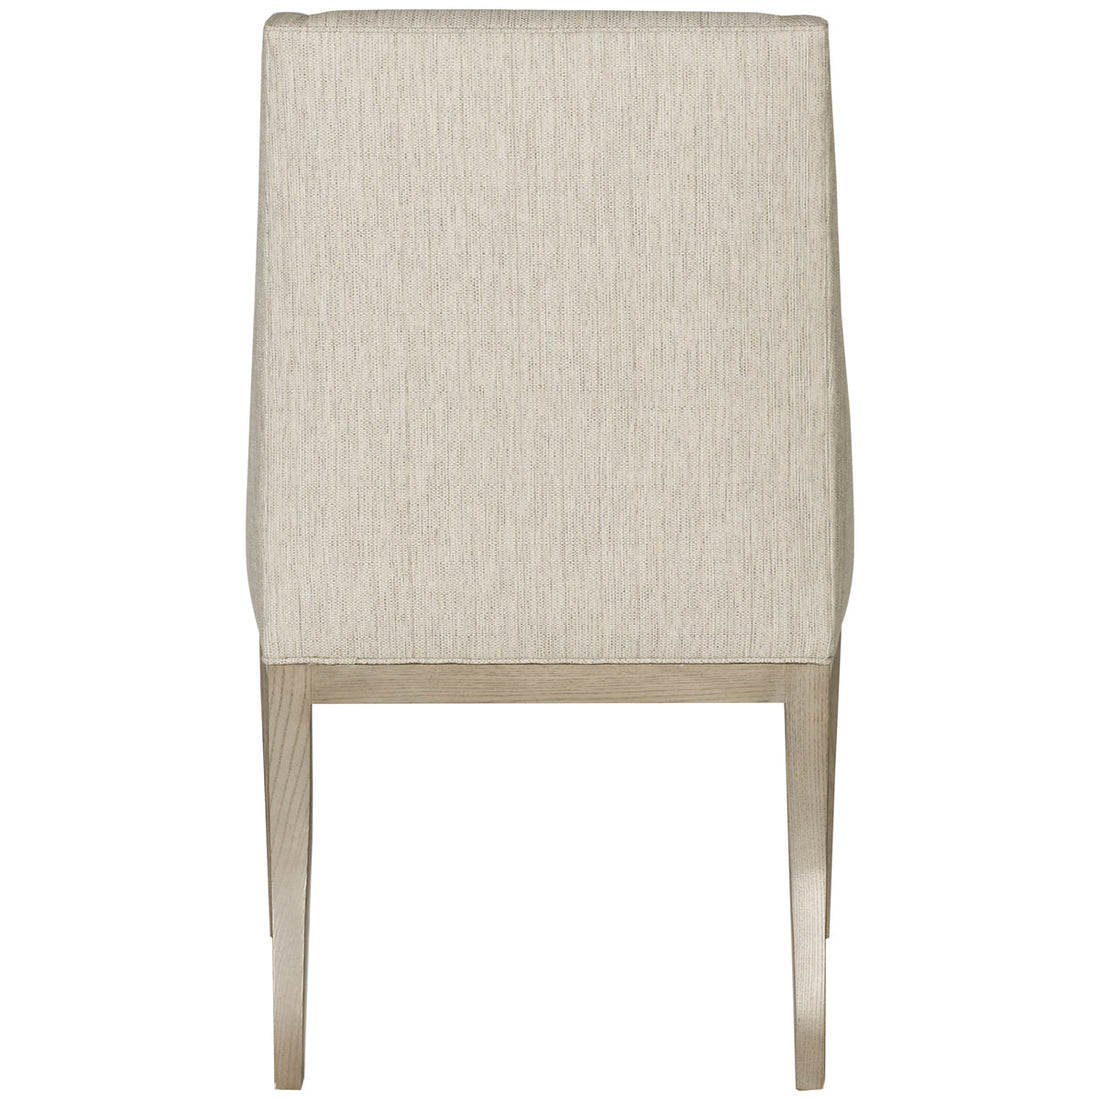 Vanguard Furniture Willow Stocked Performance Dining Chair